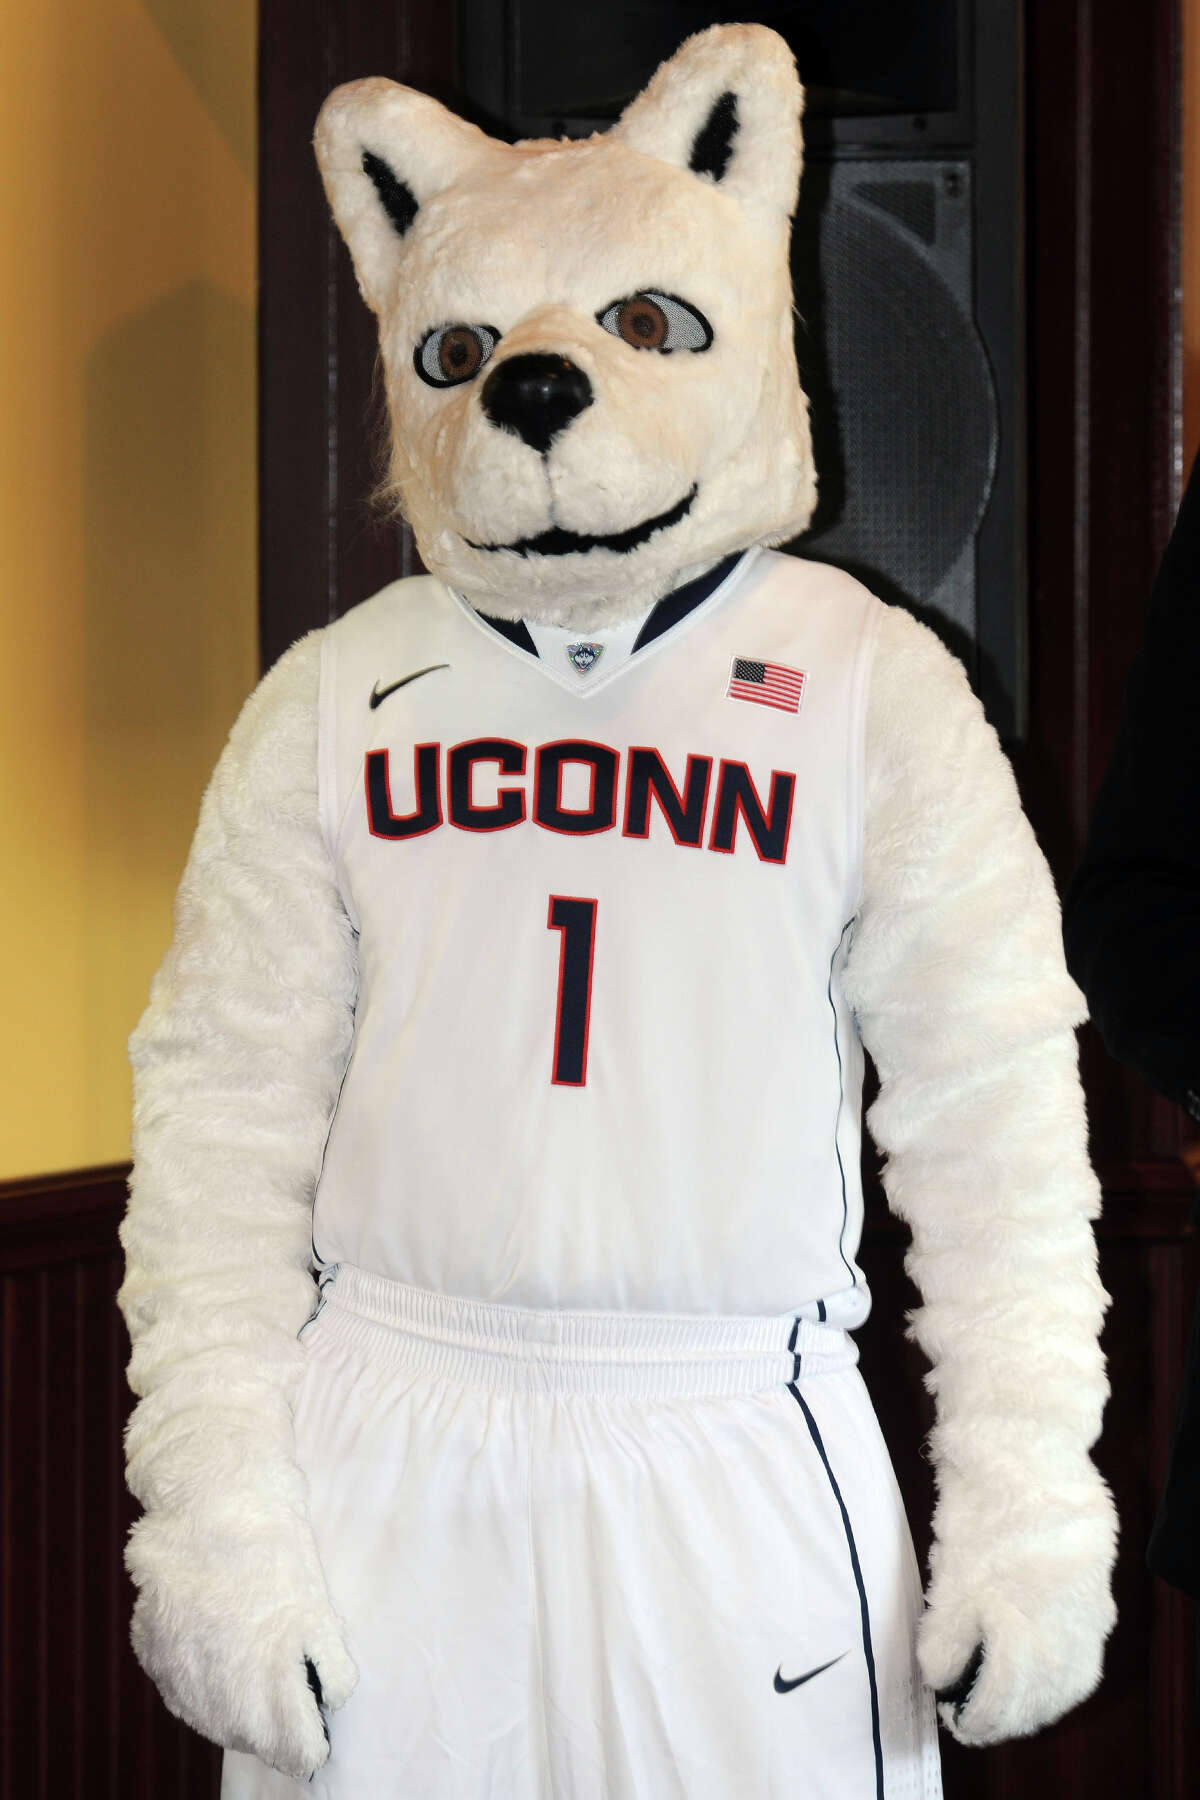 University of Connecticut mascot Jonathan the Husky attends a press conference to announce a new partnership between Harbor Yard Sports and Entertainment, Webster Bank Arena and UConn Athletics, held at the arena in Bridgeport, Conn., Oct. 7, 2013. The UConn menâÄôs and womenâÄôs basketball teams will both play a home game at the arena this season.